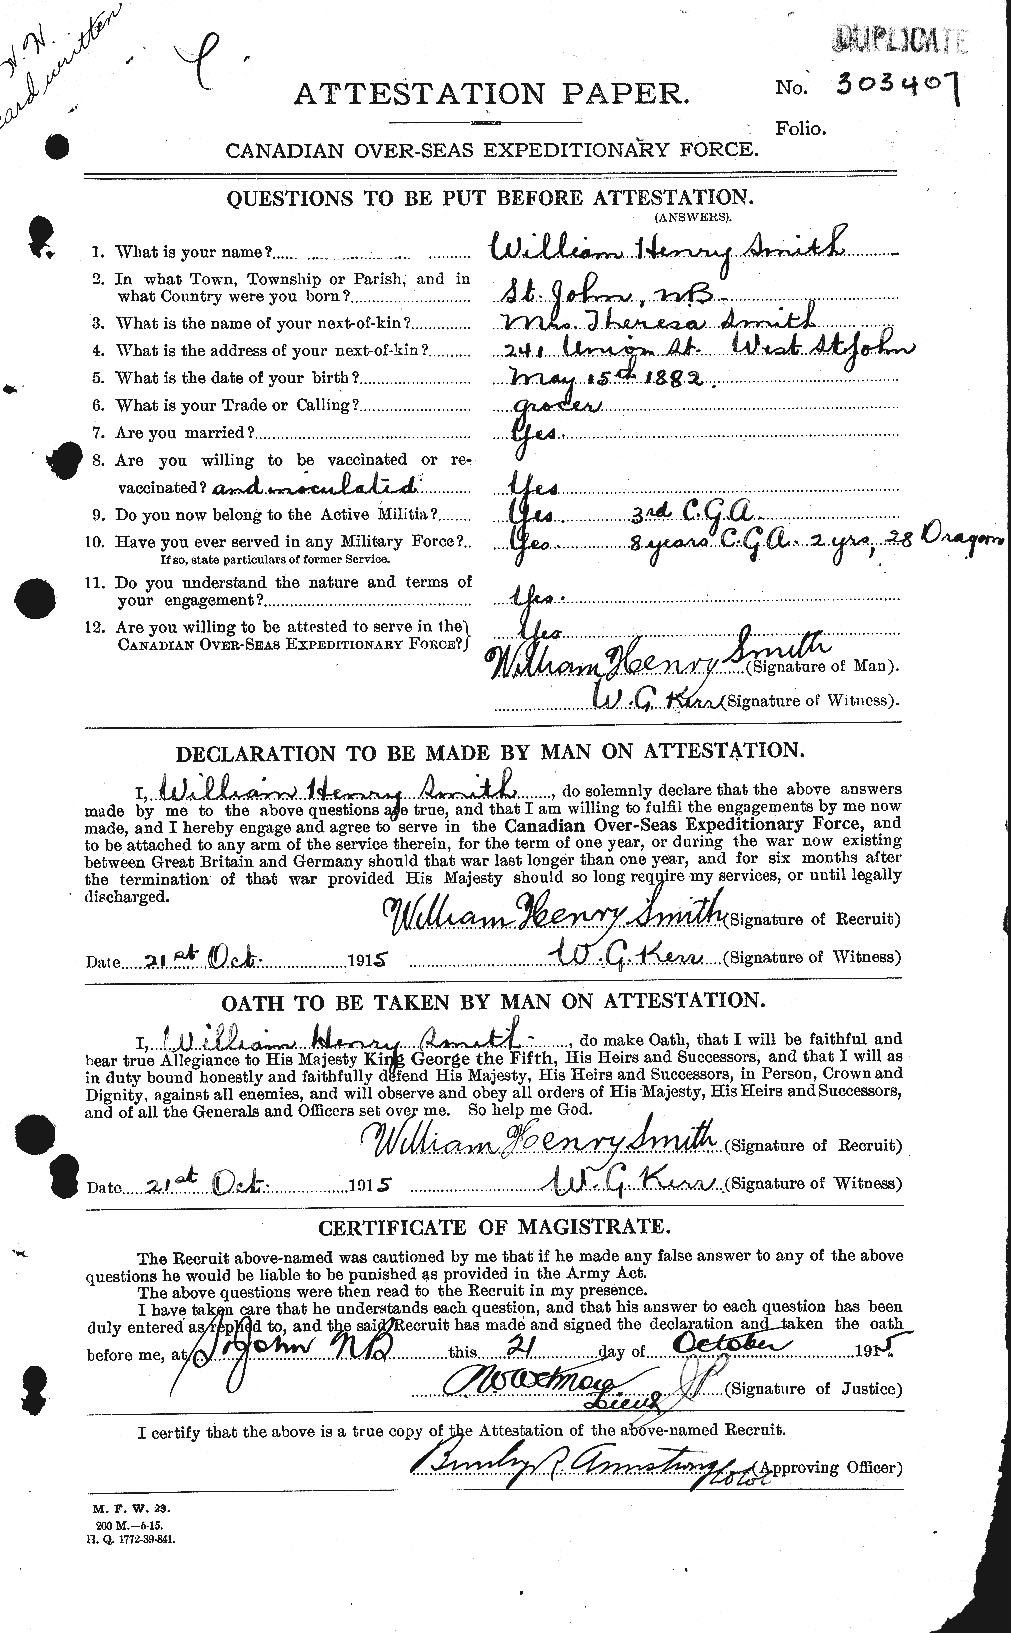 Personnel Records of the First World War - CEF 109275a